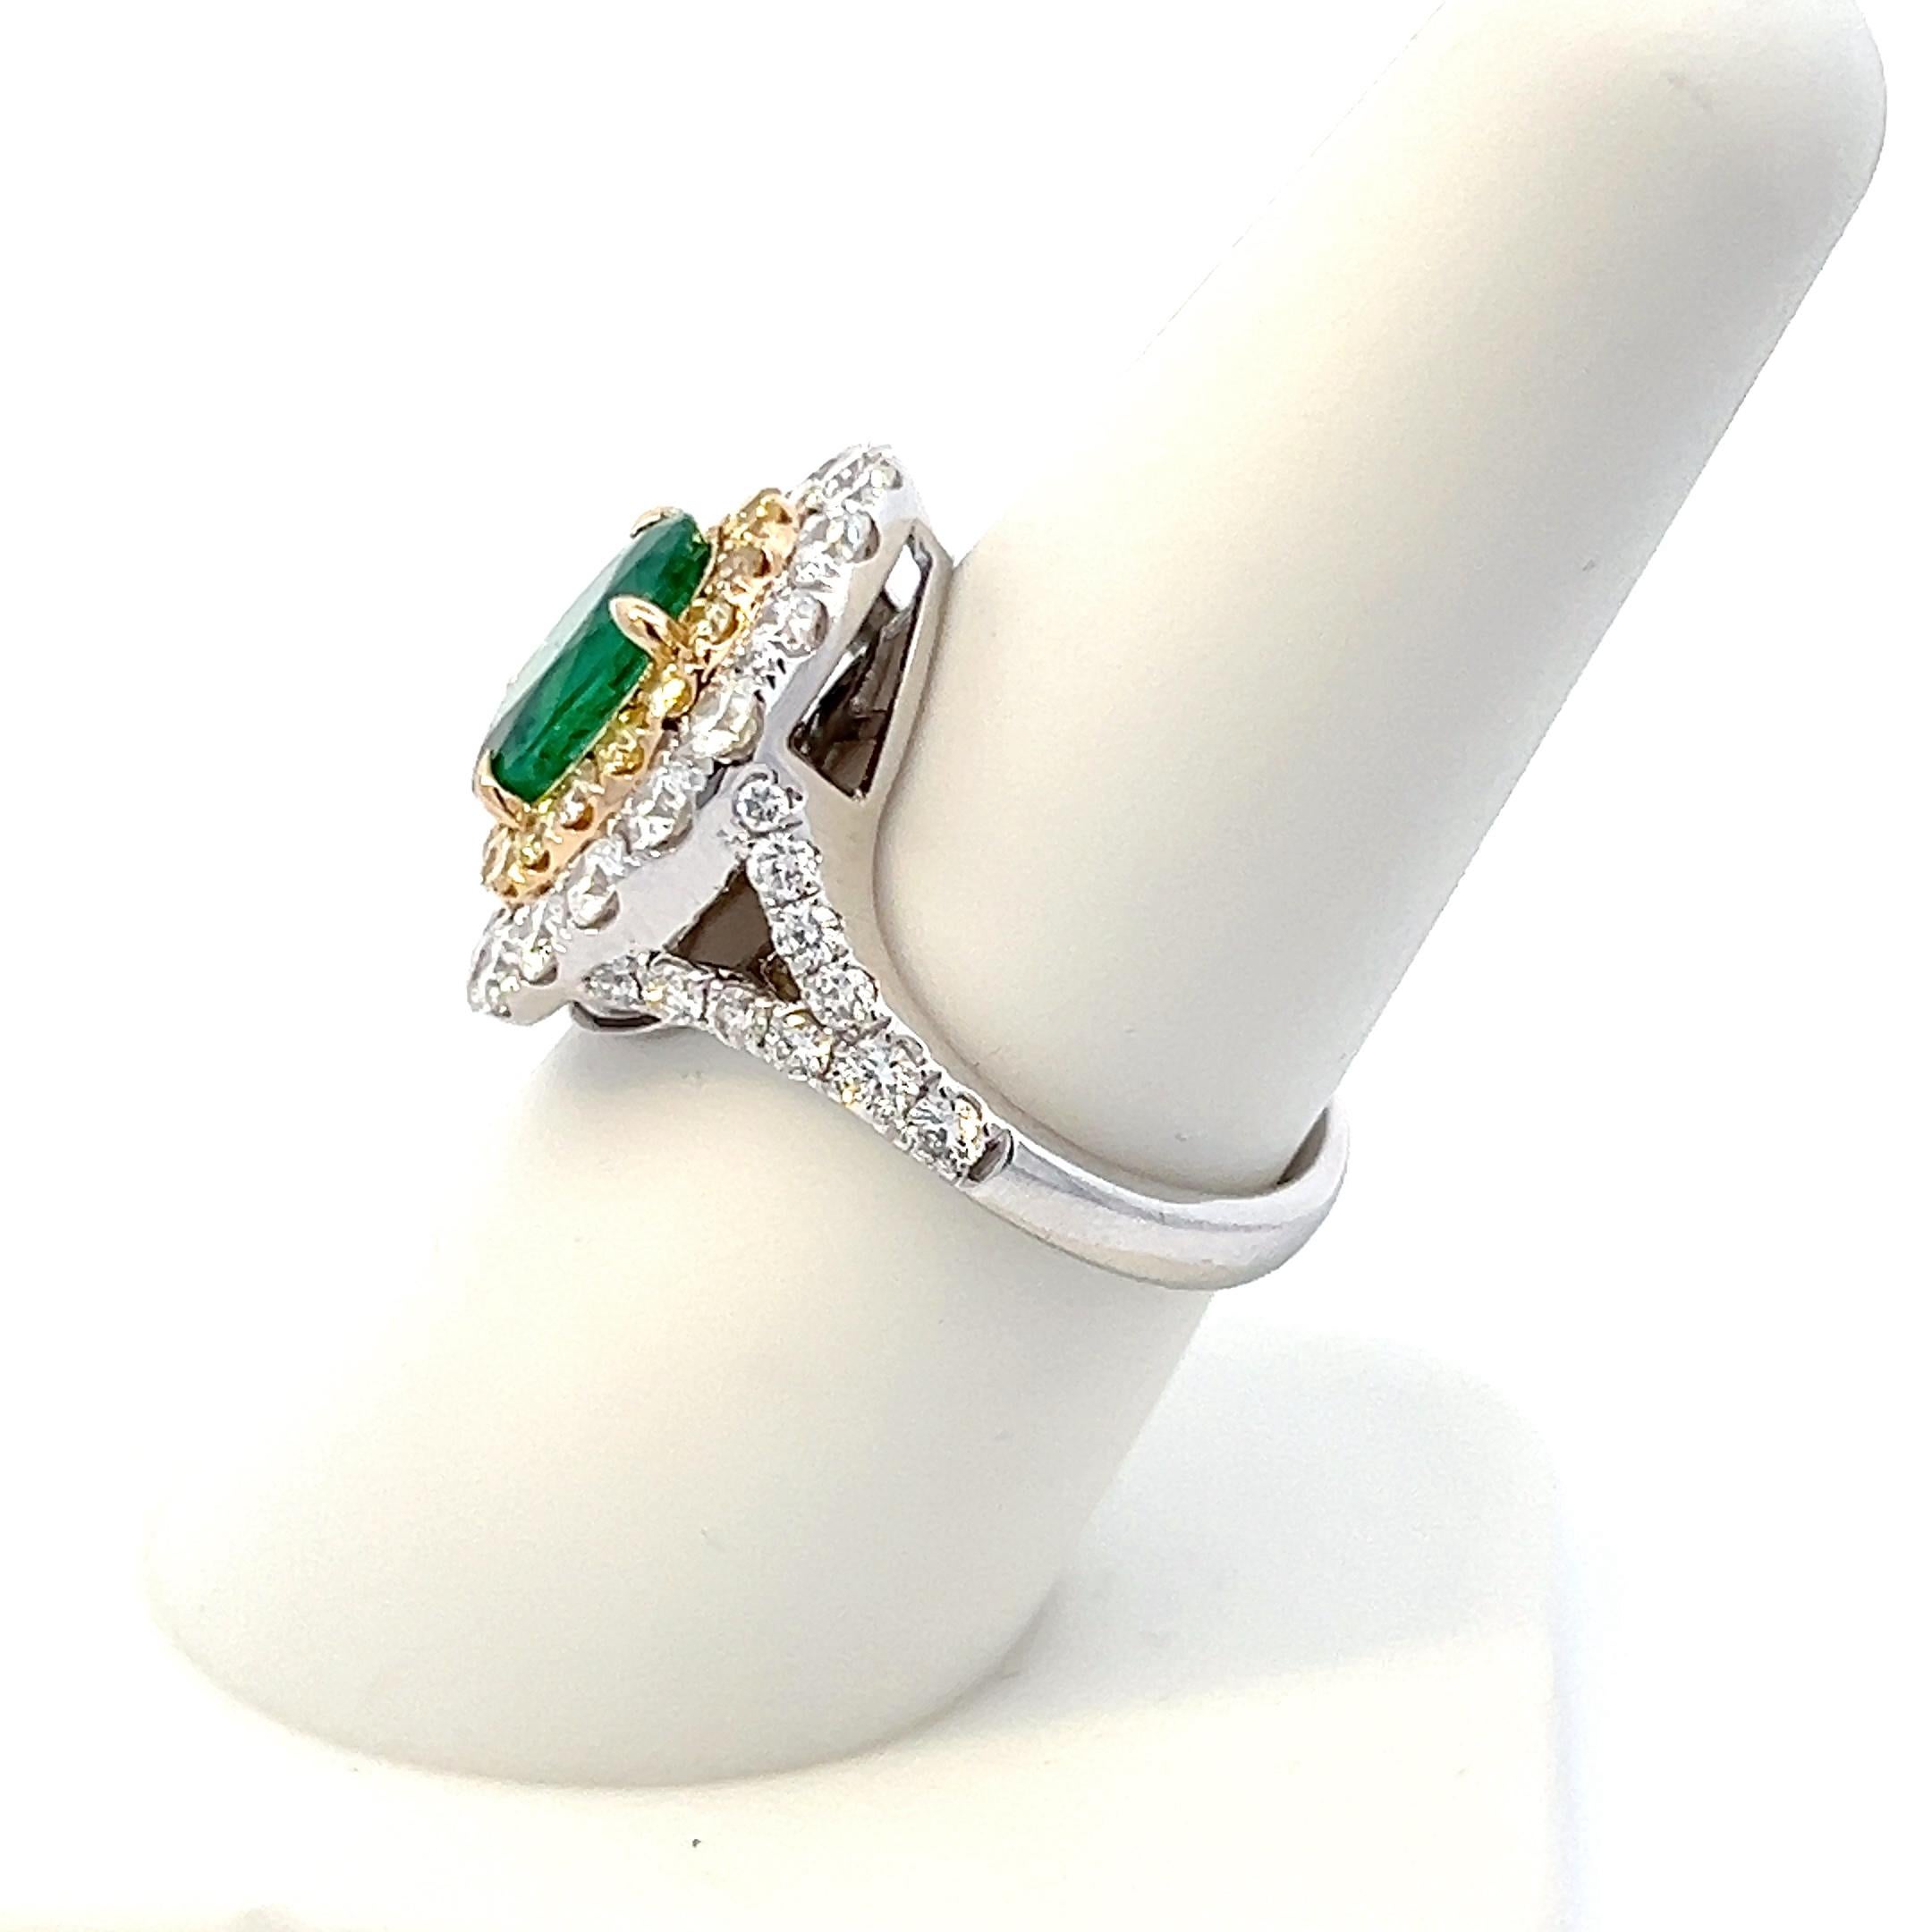 Introducing our exquisite Emerald and Diamond Ring, a true testament to timeless elegance and sophistication. This enchanting piece is crafted in lustrous 18K white gold, with a unique touch of yellow gold in the inner halo, adding a subtle contrast